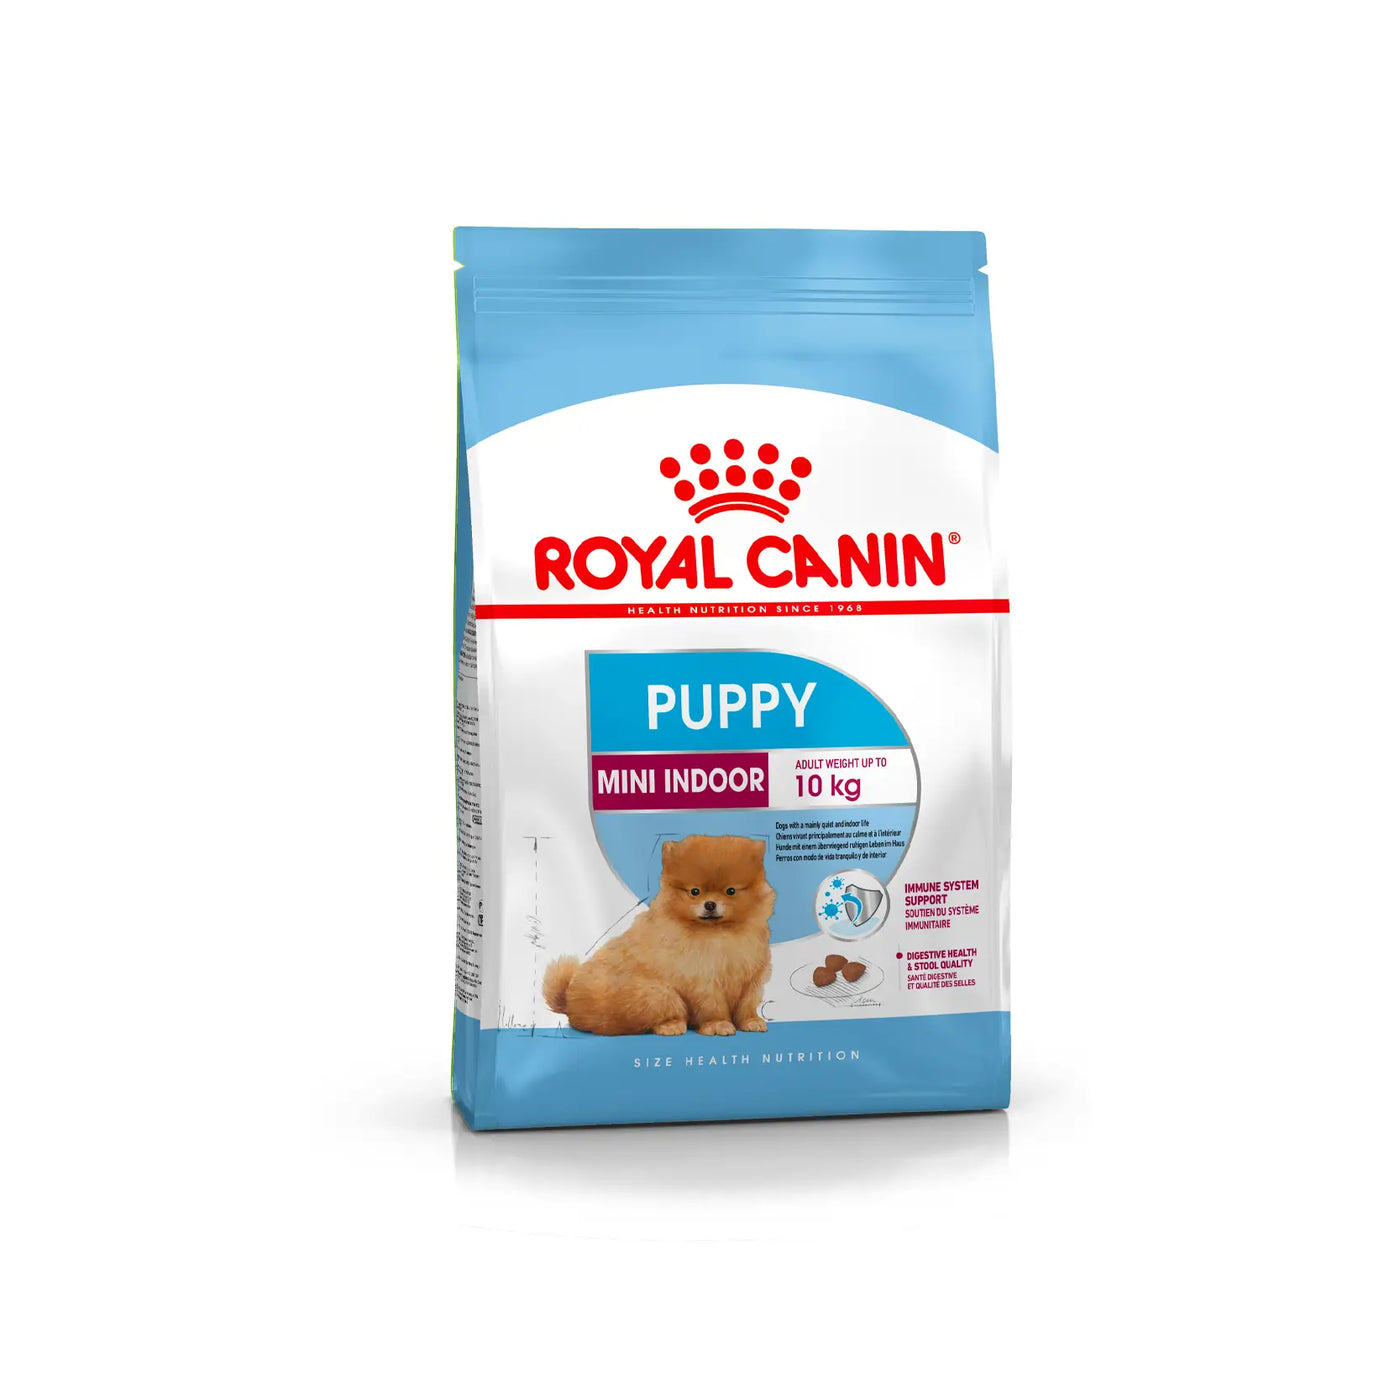 Royal Canin - Puppy Mini Indoor Dry Food